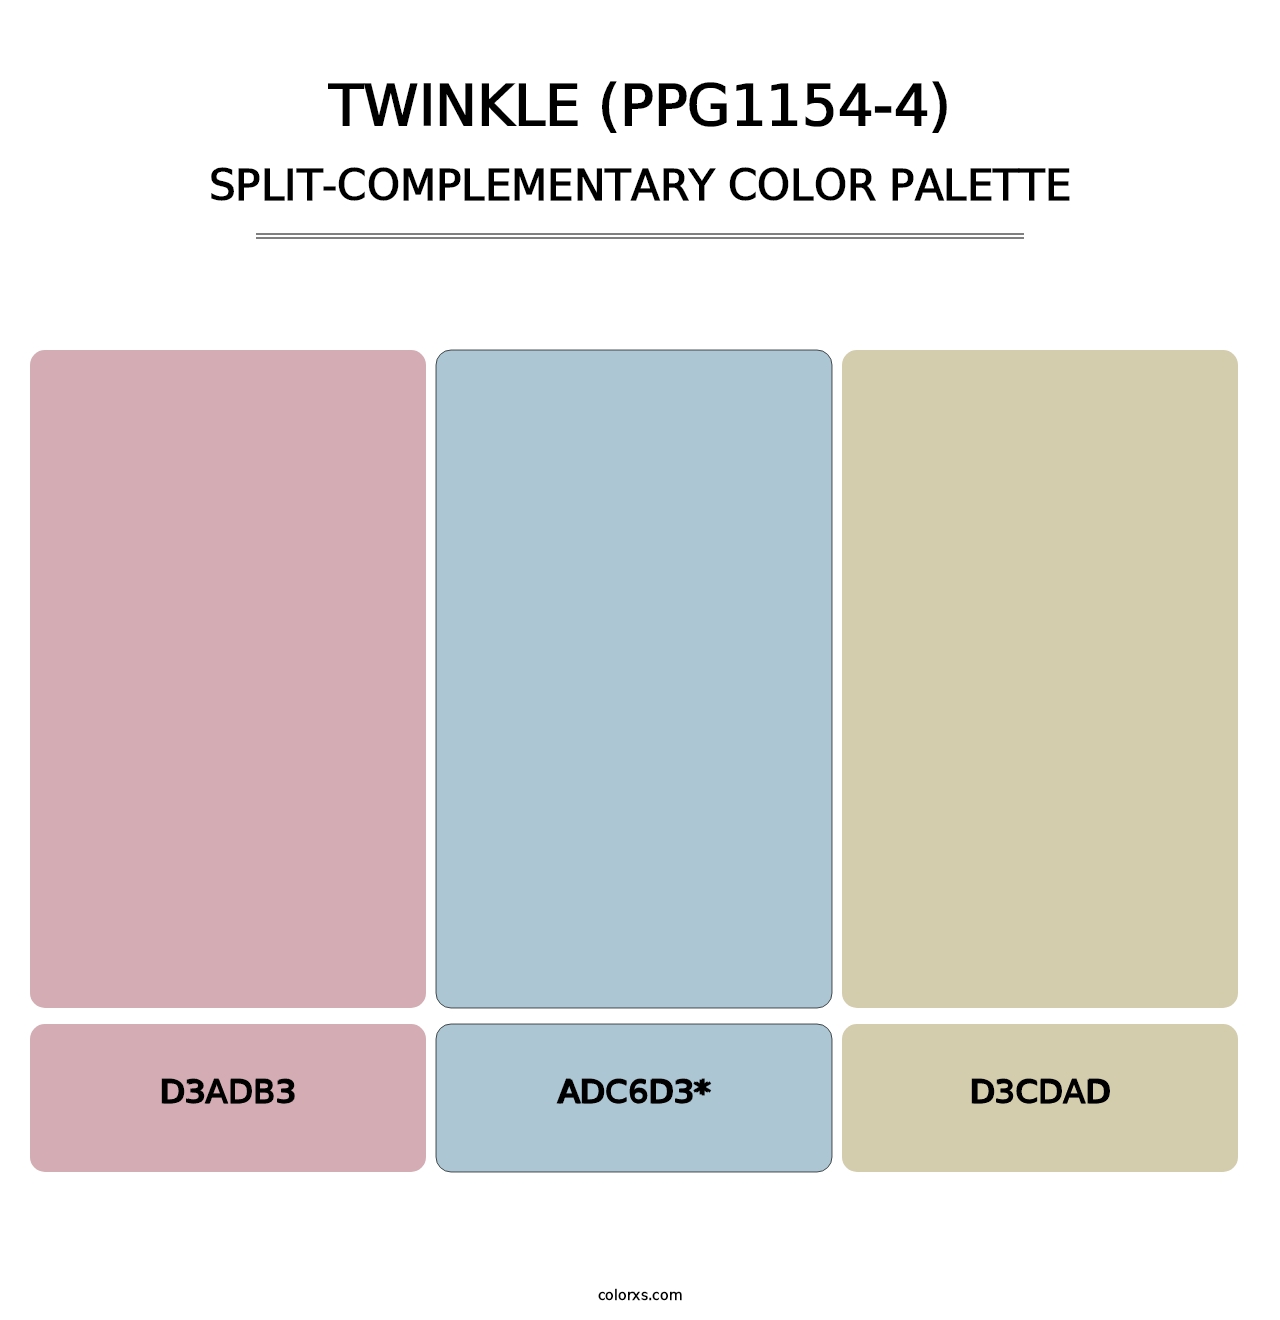 Twinkle (PPG1154-4) - Split-Complementary Color Palette